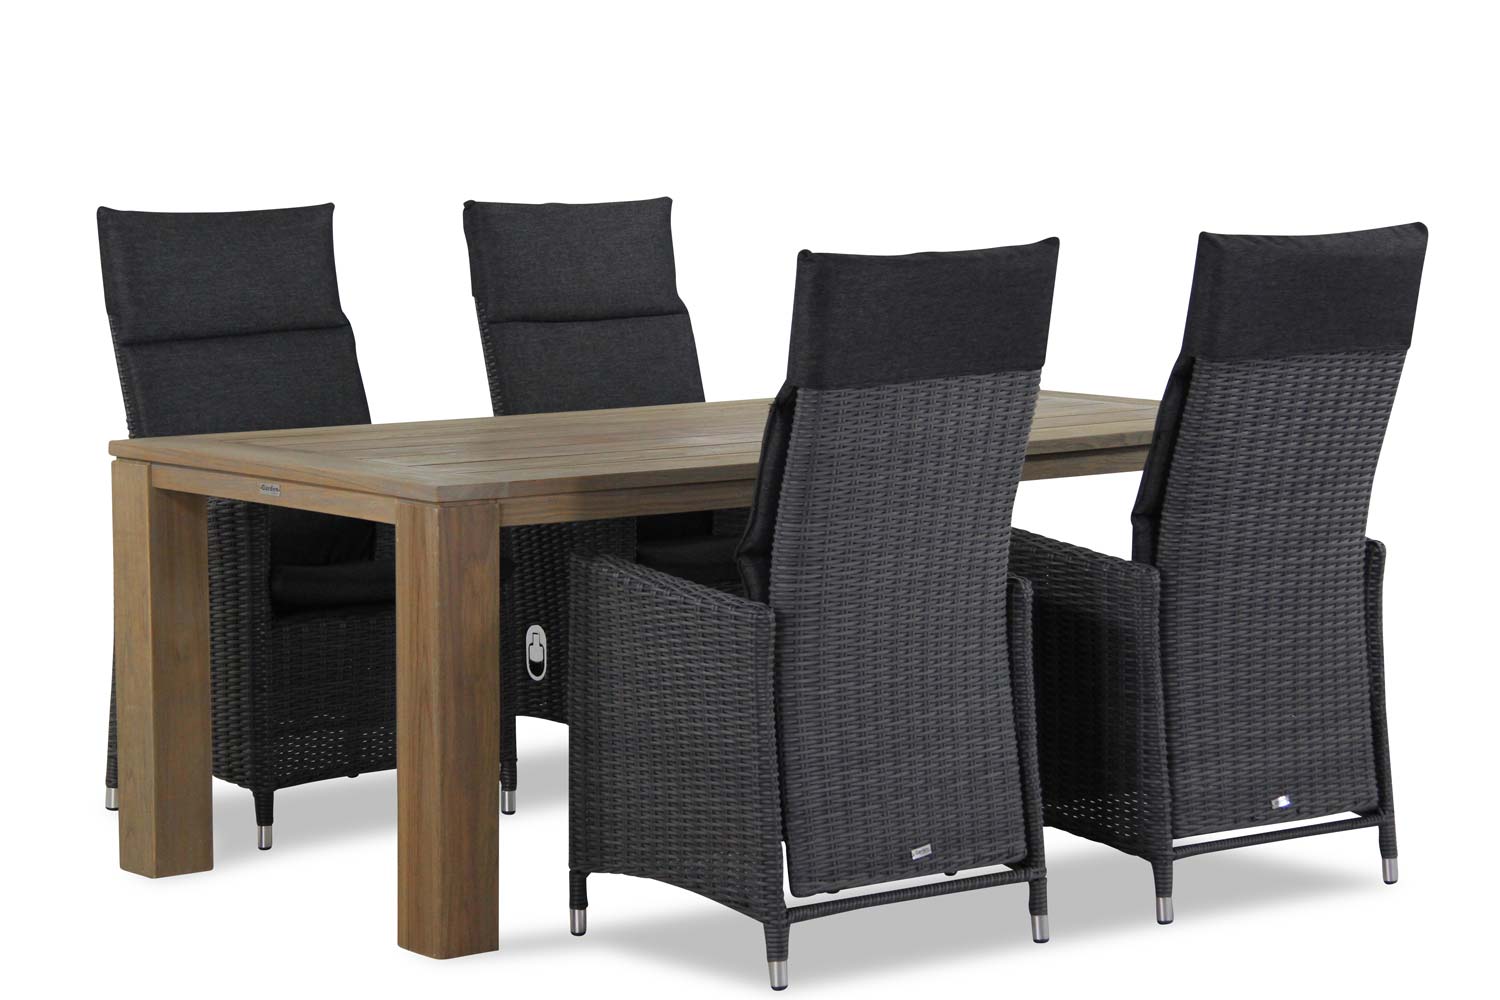 Garden Collections Madera Brighton 200 cm dining tuinset 5 delig